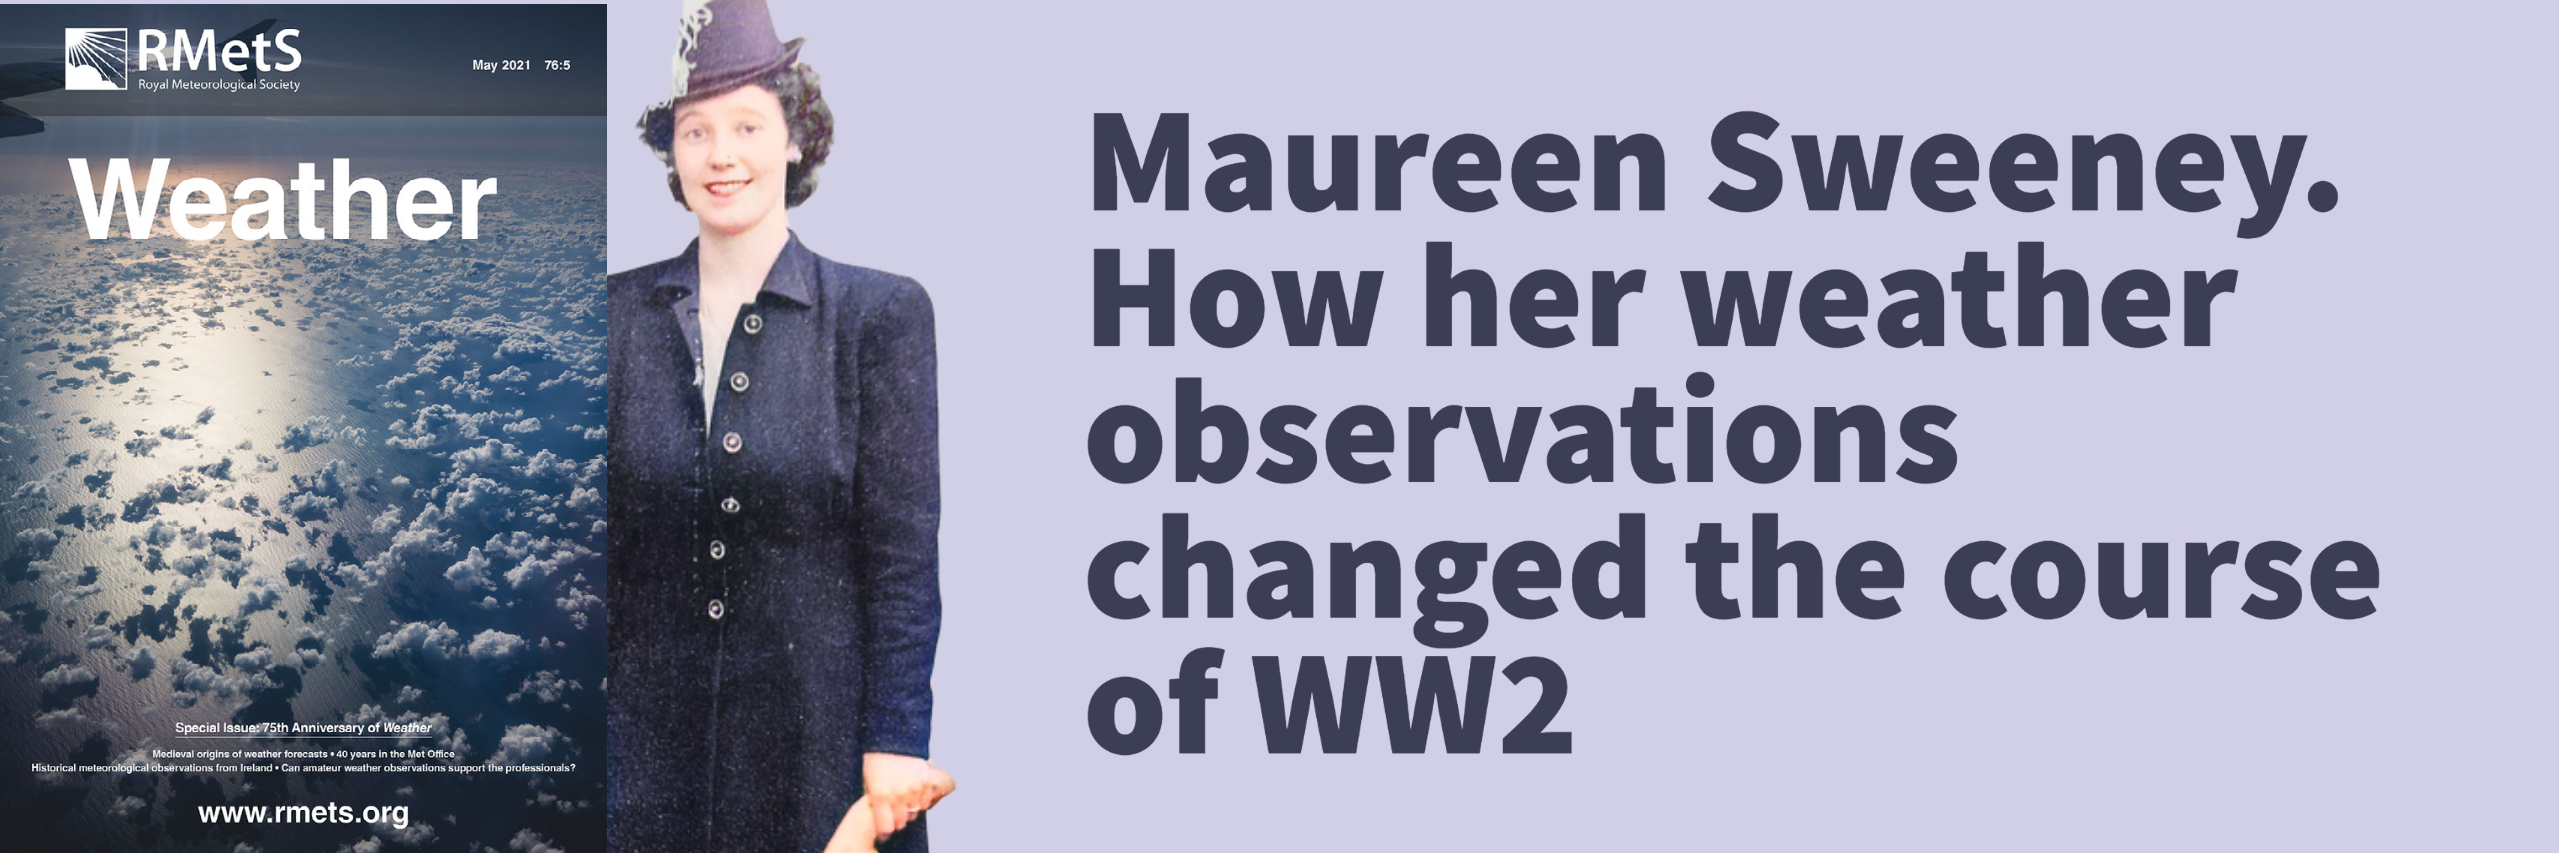 The cover of Weather and a photo of Maureen on her wedding day with the text: Maureen Sweeney. How her weather observations changed the course of WW2